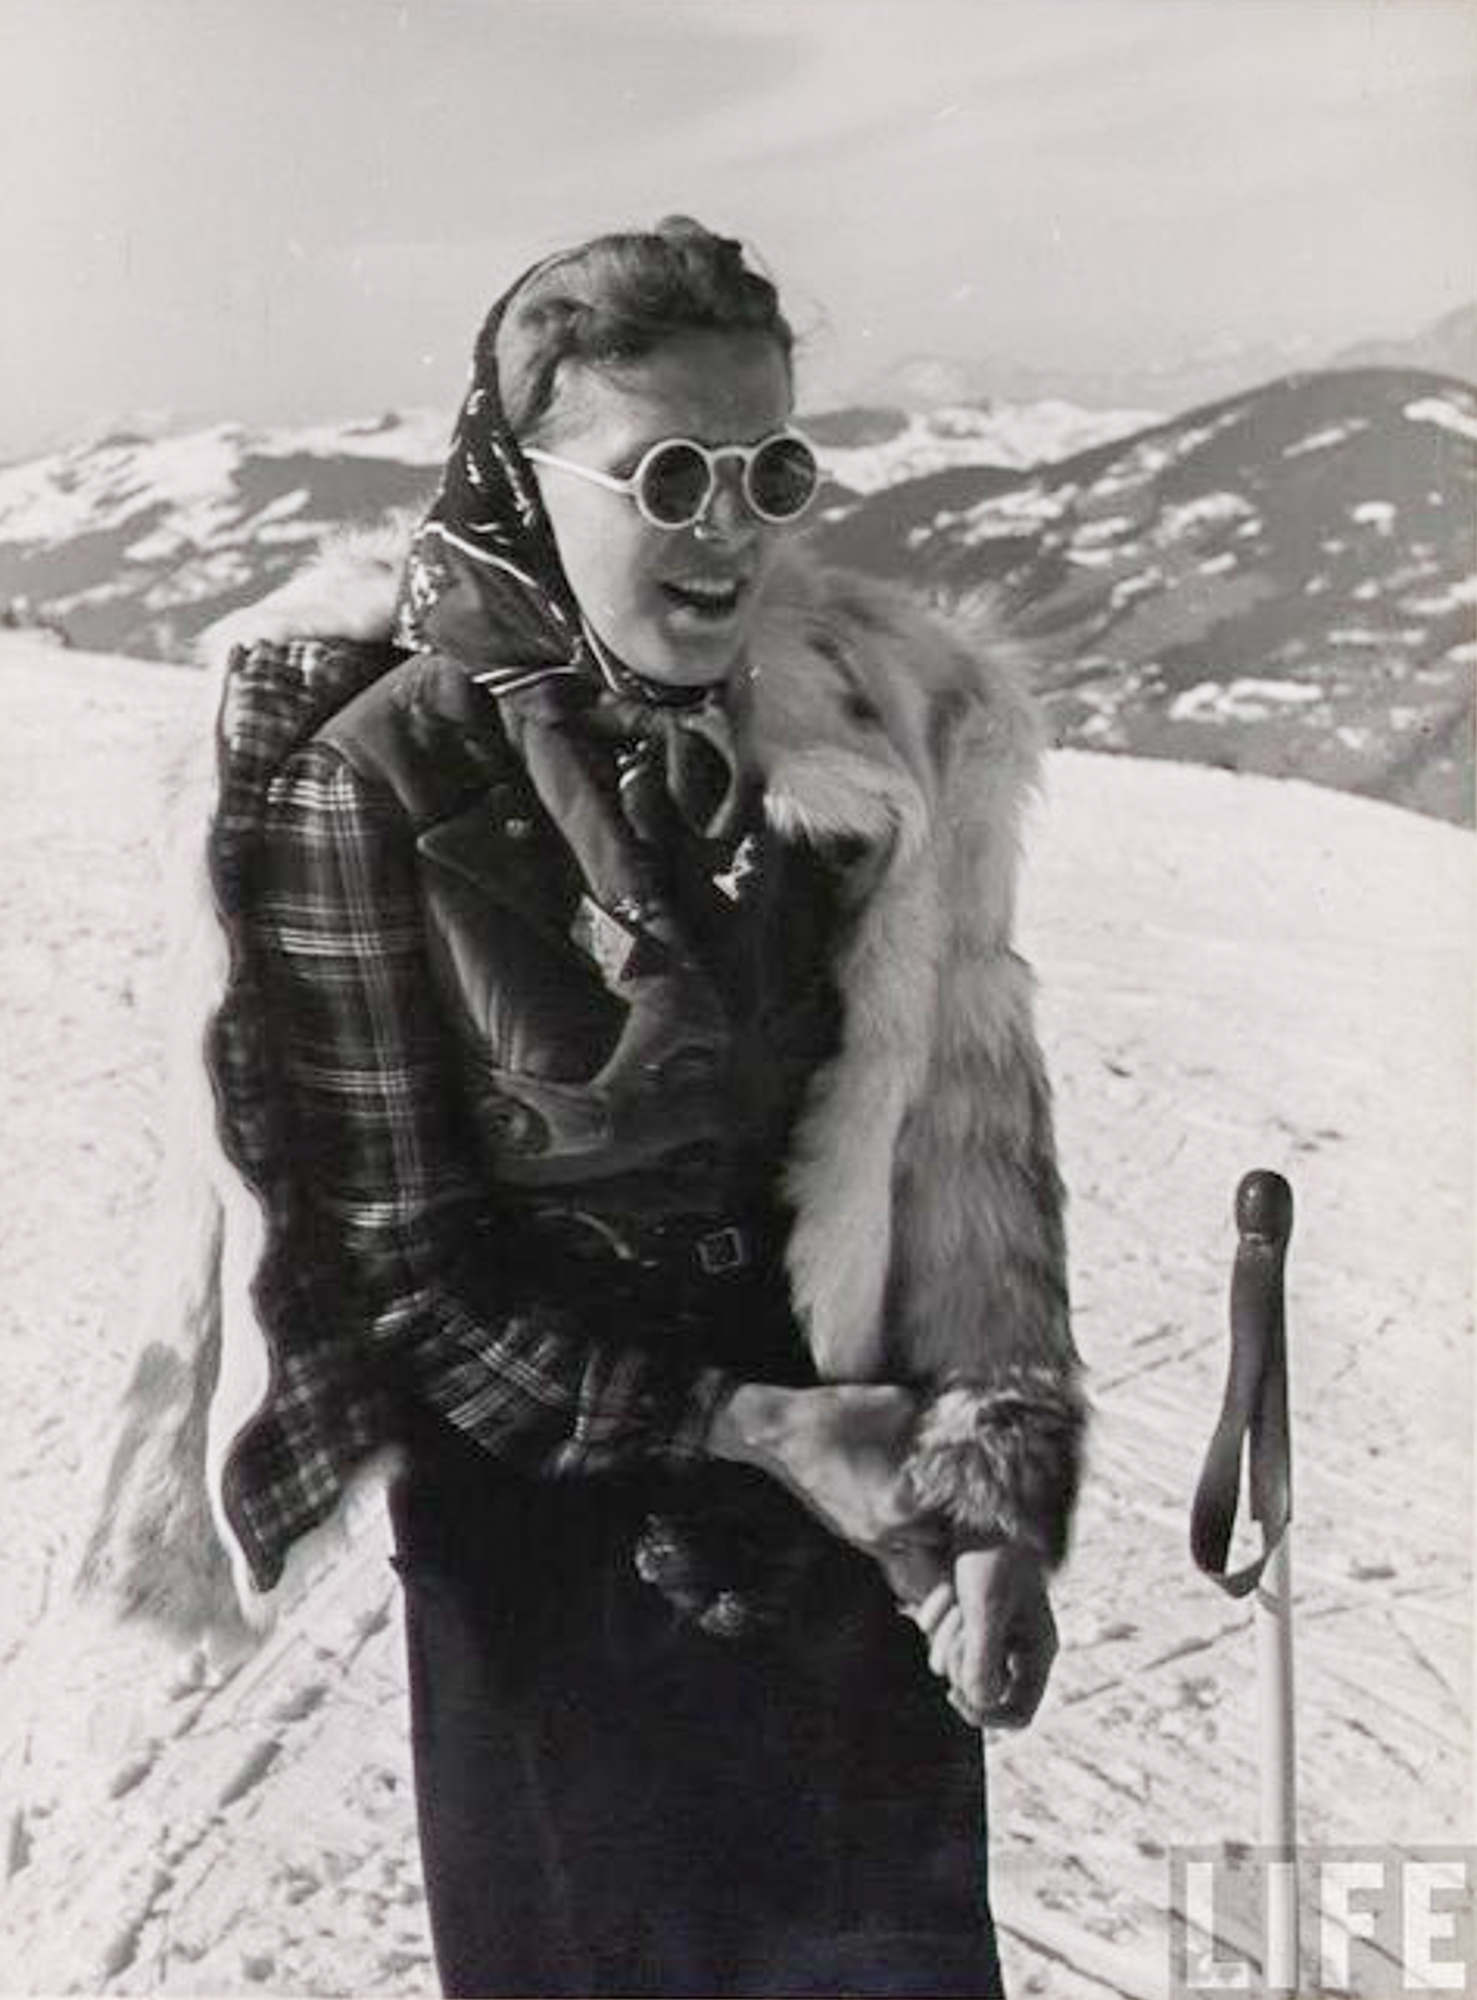 Liberating Women and Their Legs: Female Ski Fashion's Shift to Pants in the  Early 20th Century – History of Skiing & Snowsports